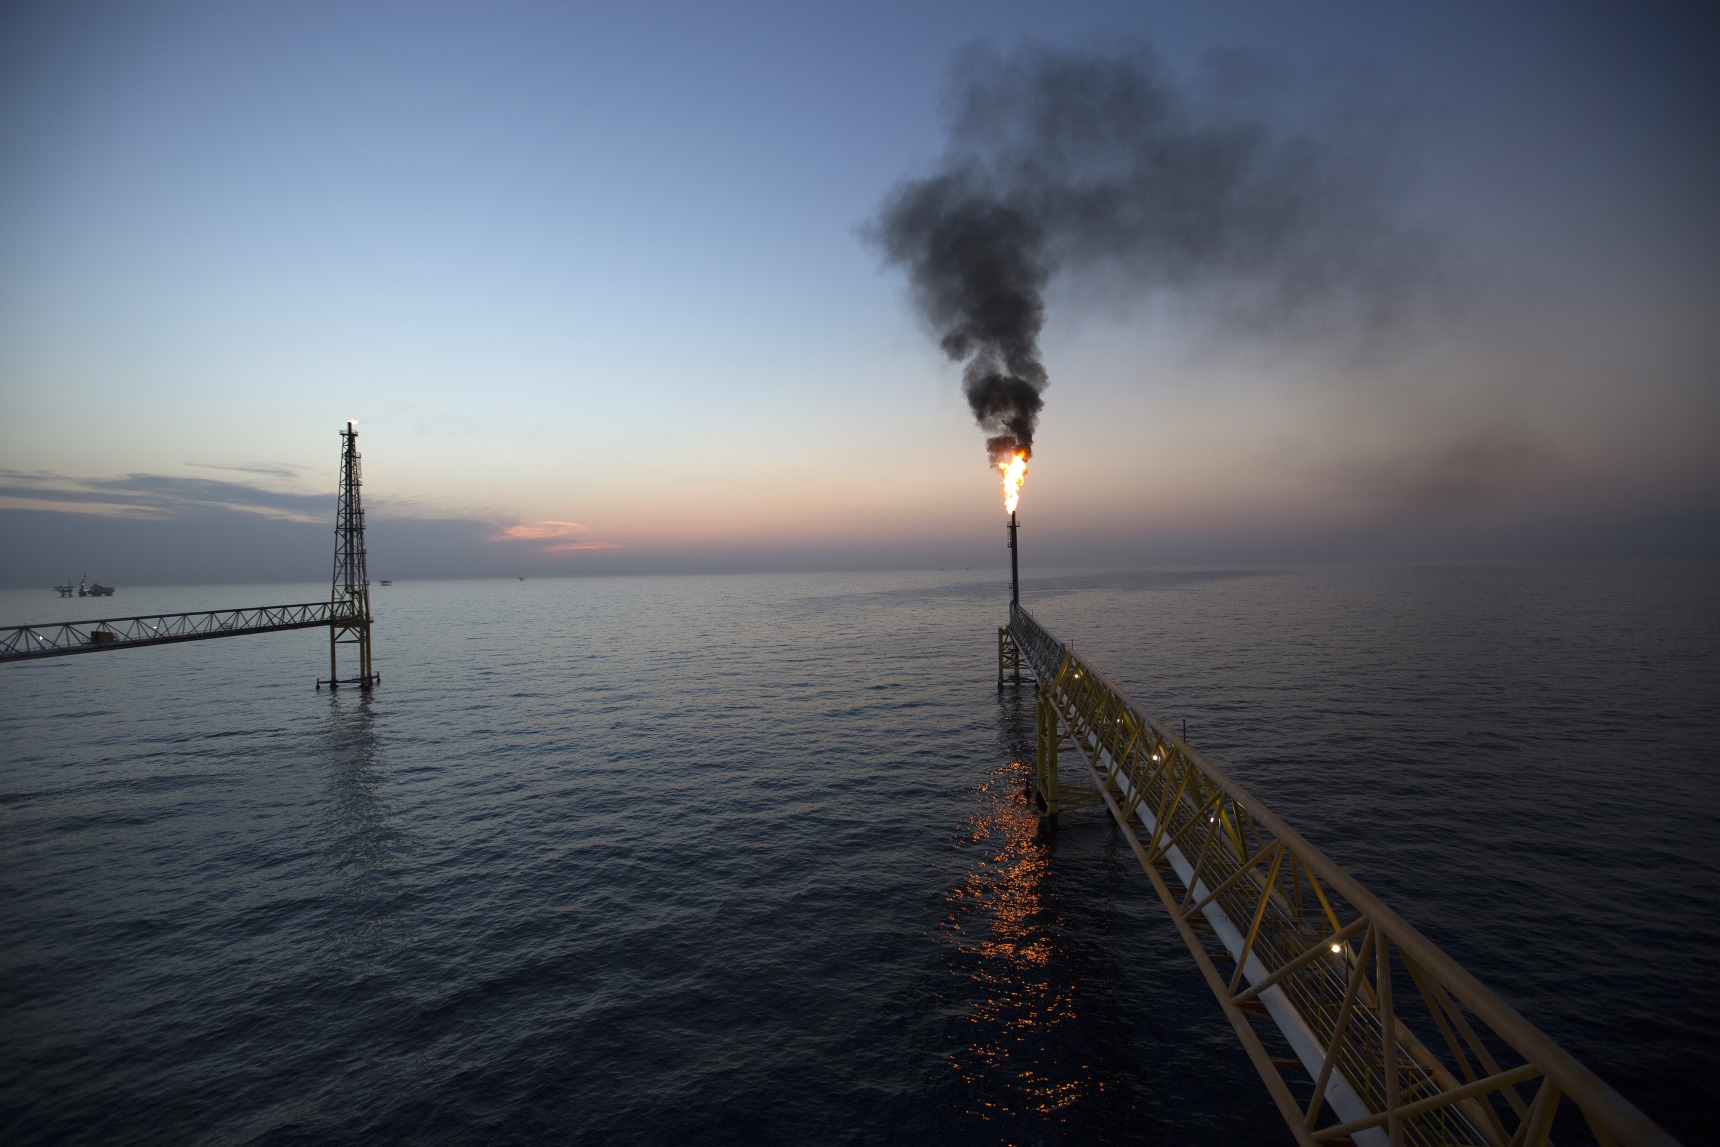 Gas flares from a burner tower on the Petroleos Mexicanos (Pemex) Pol-A Platform complex, located on the continental shelf in the Gulf of Mexico.